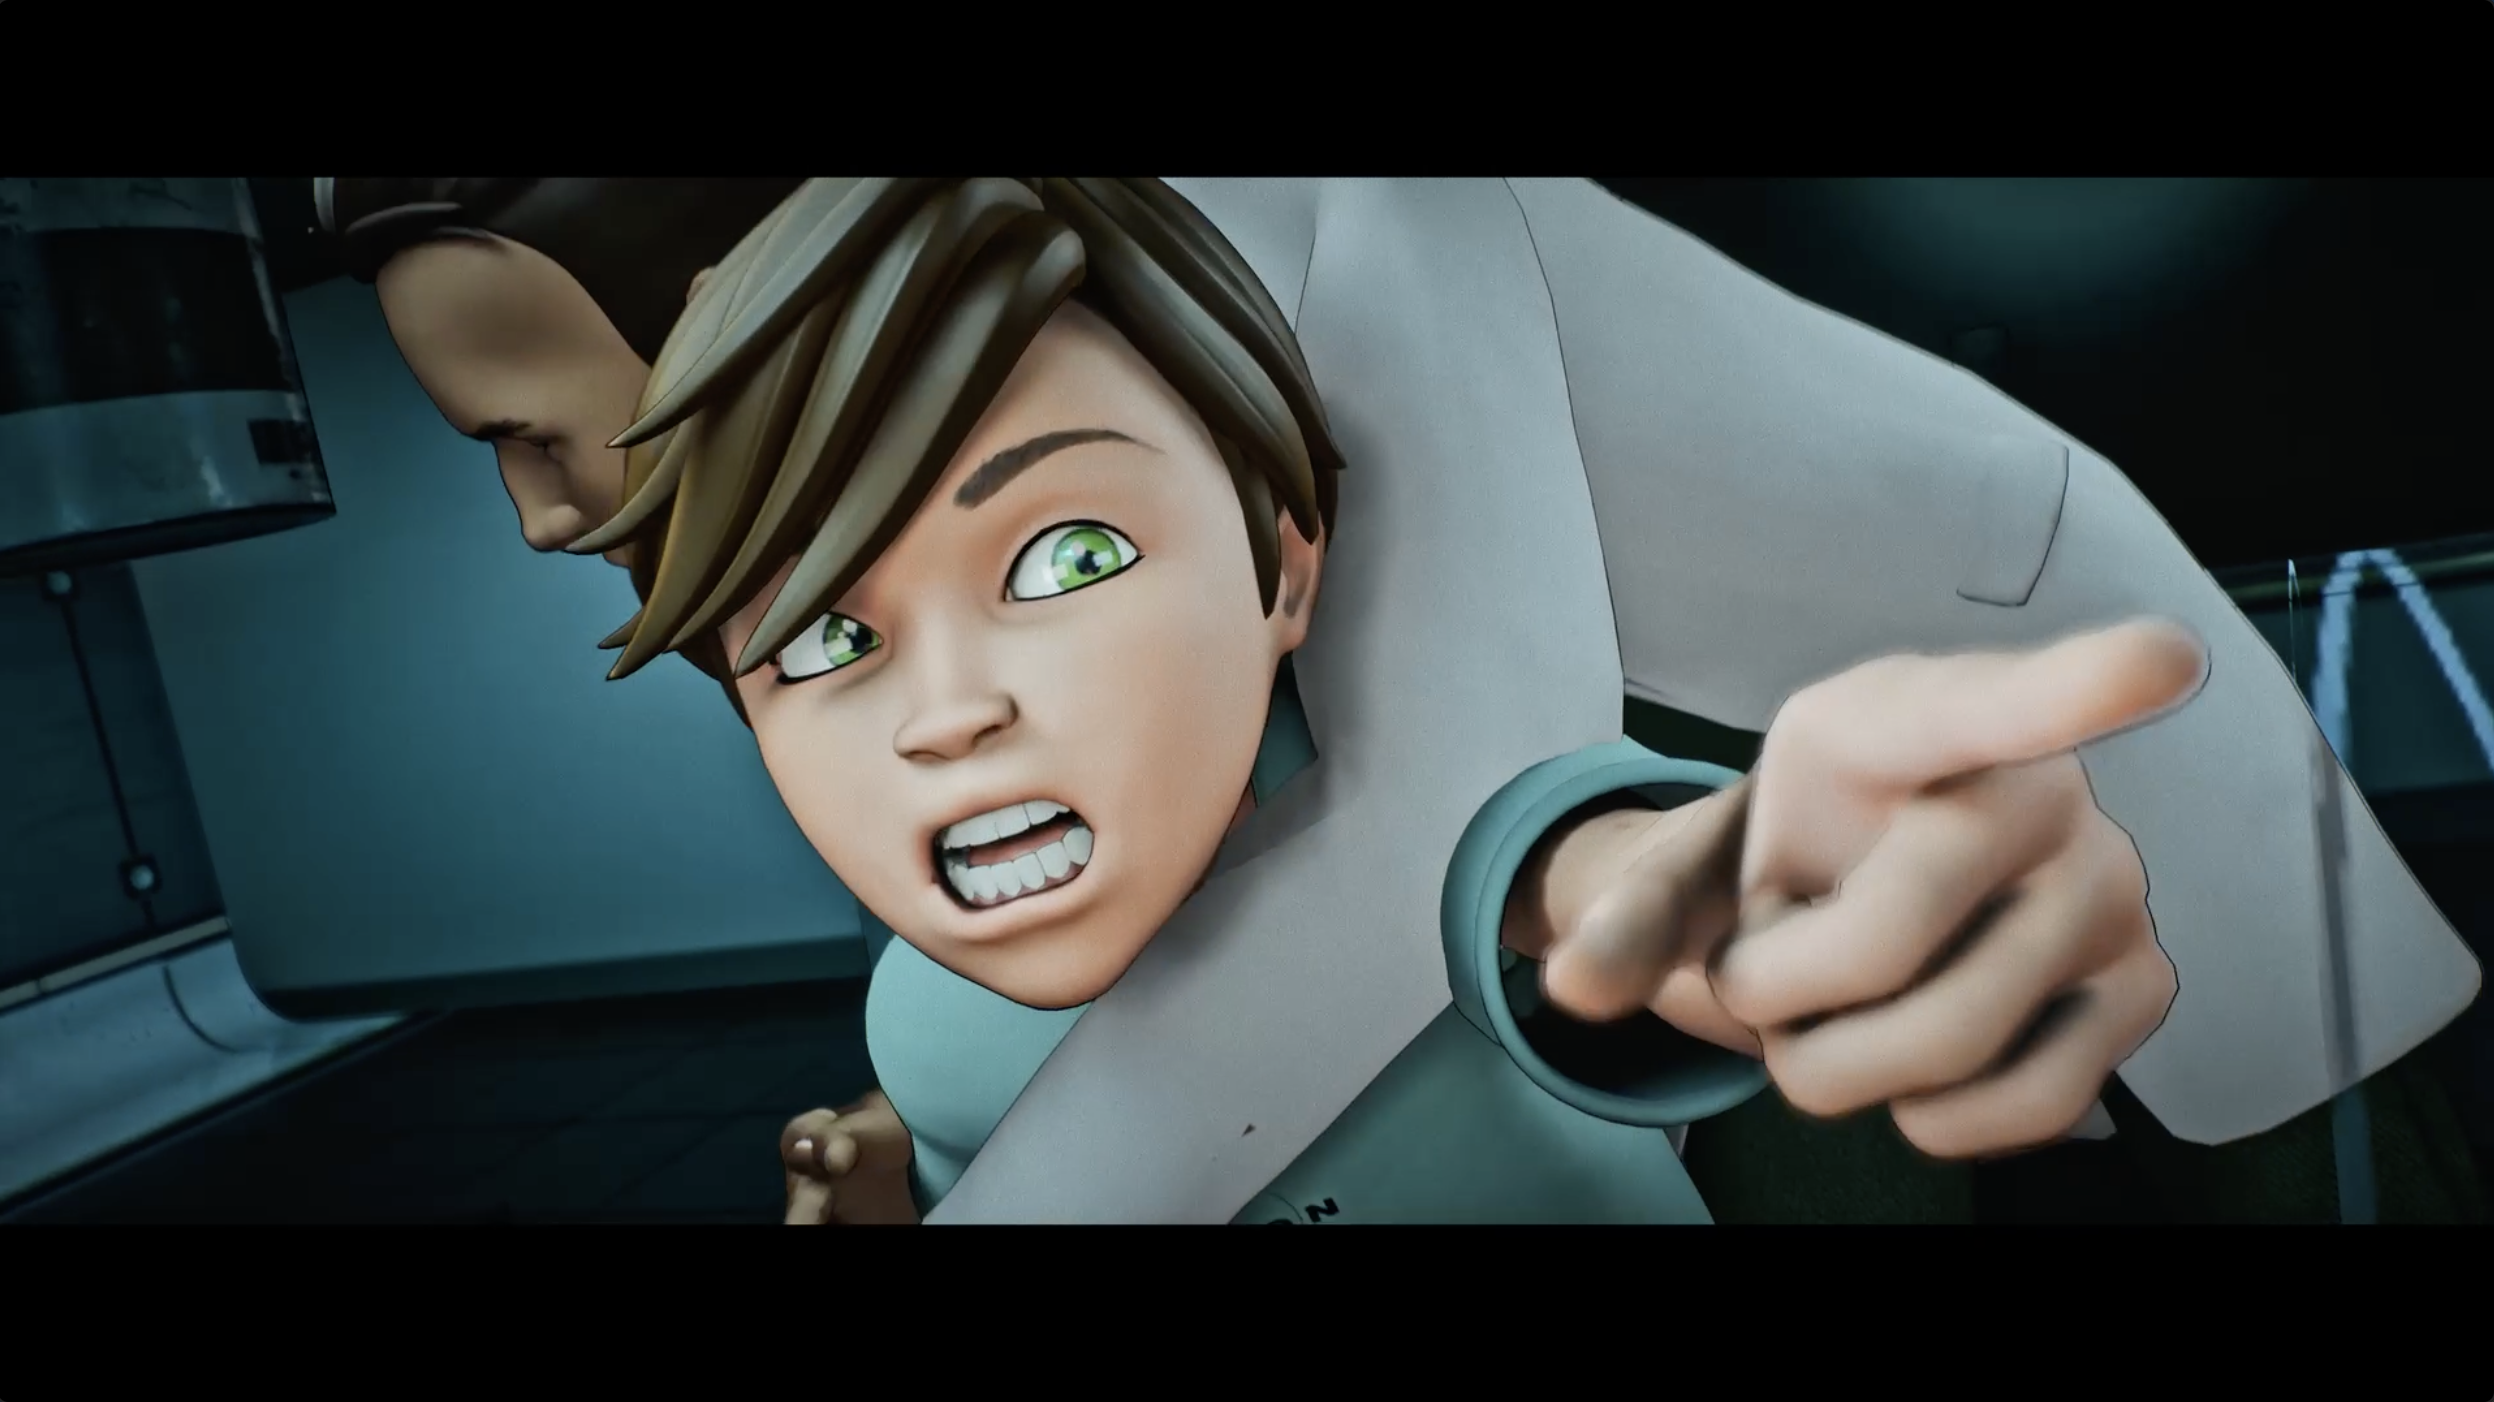 Screenshot from the animated film Max Beyond